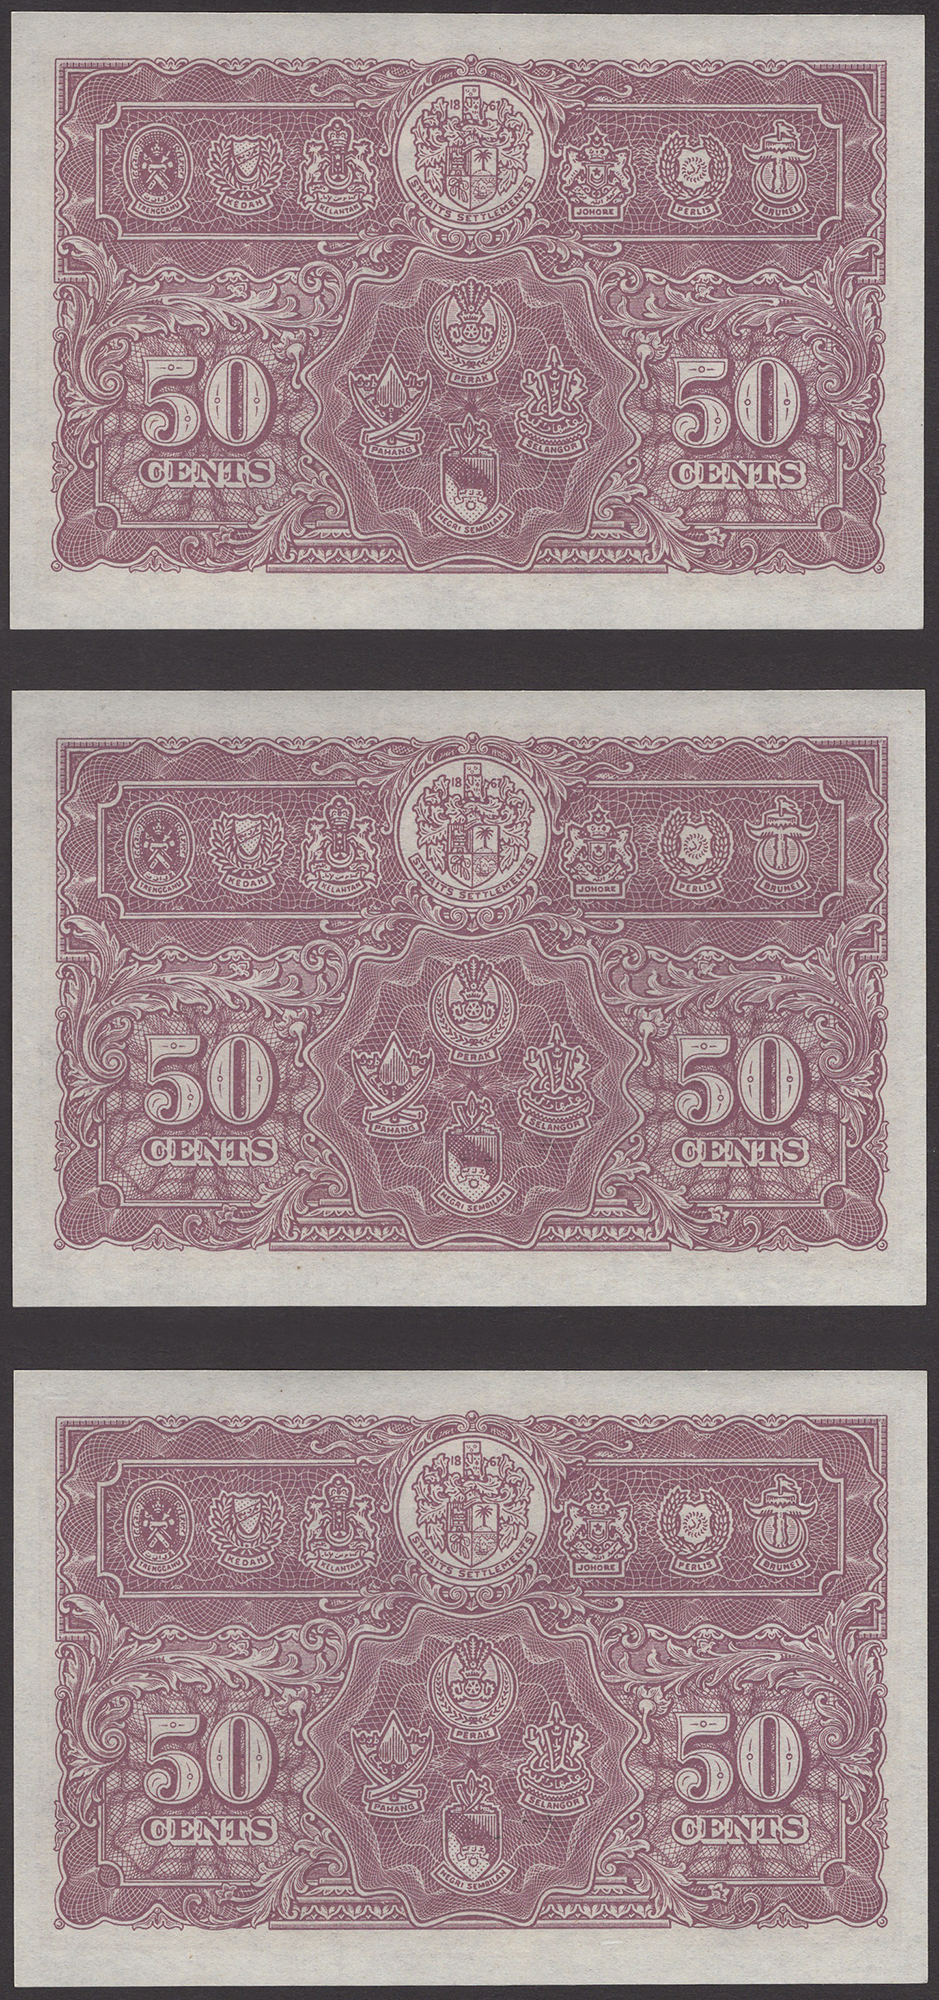 Board of Commissioners of Currency Malaya, 50 Cents (3), 1 July 1941, serial numbers A/33... - Image 2 of 2